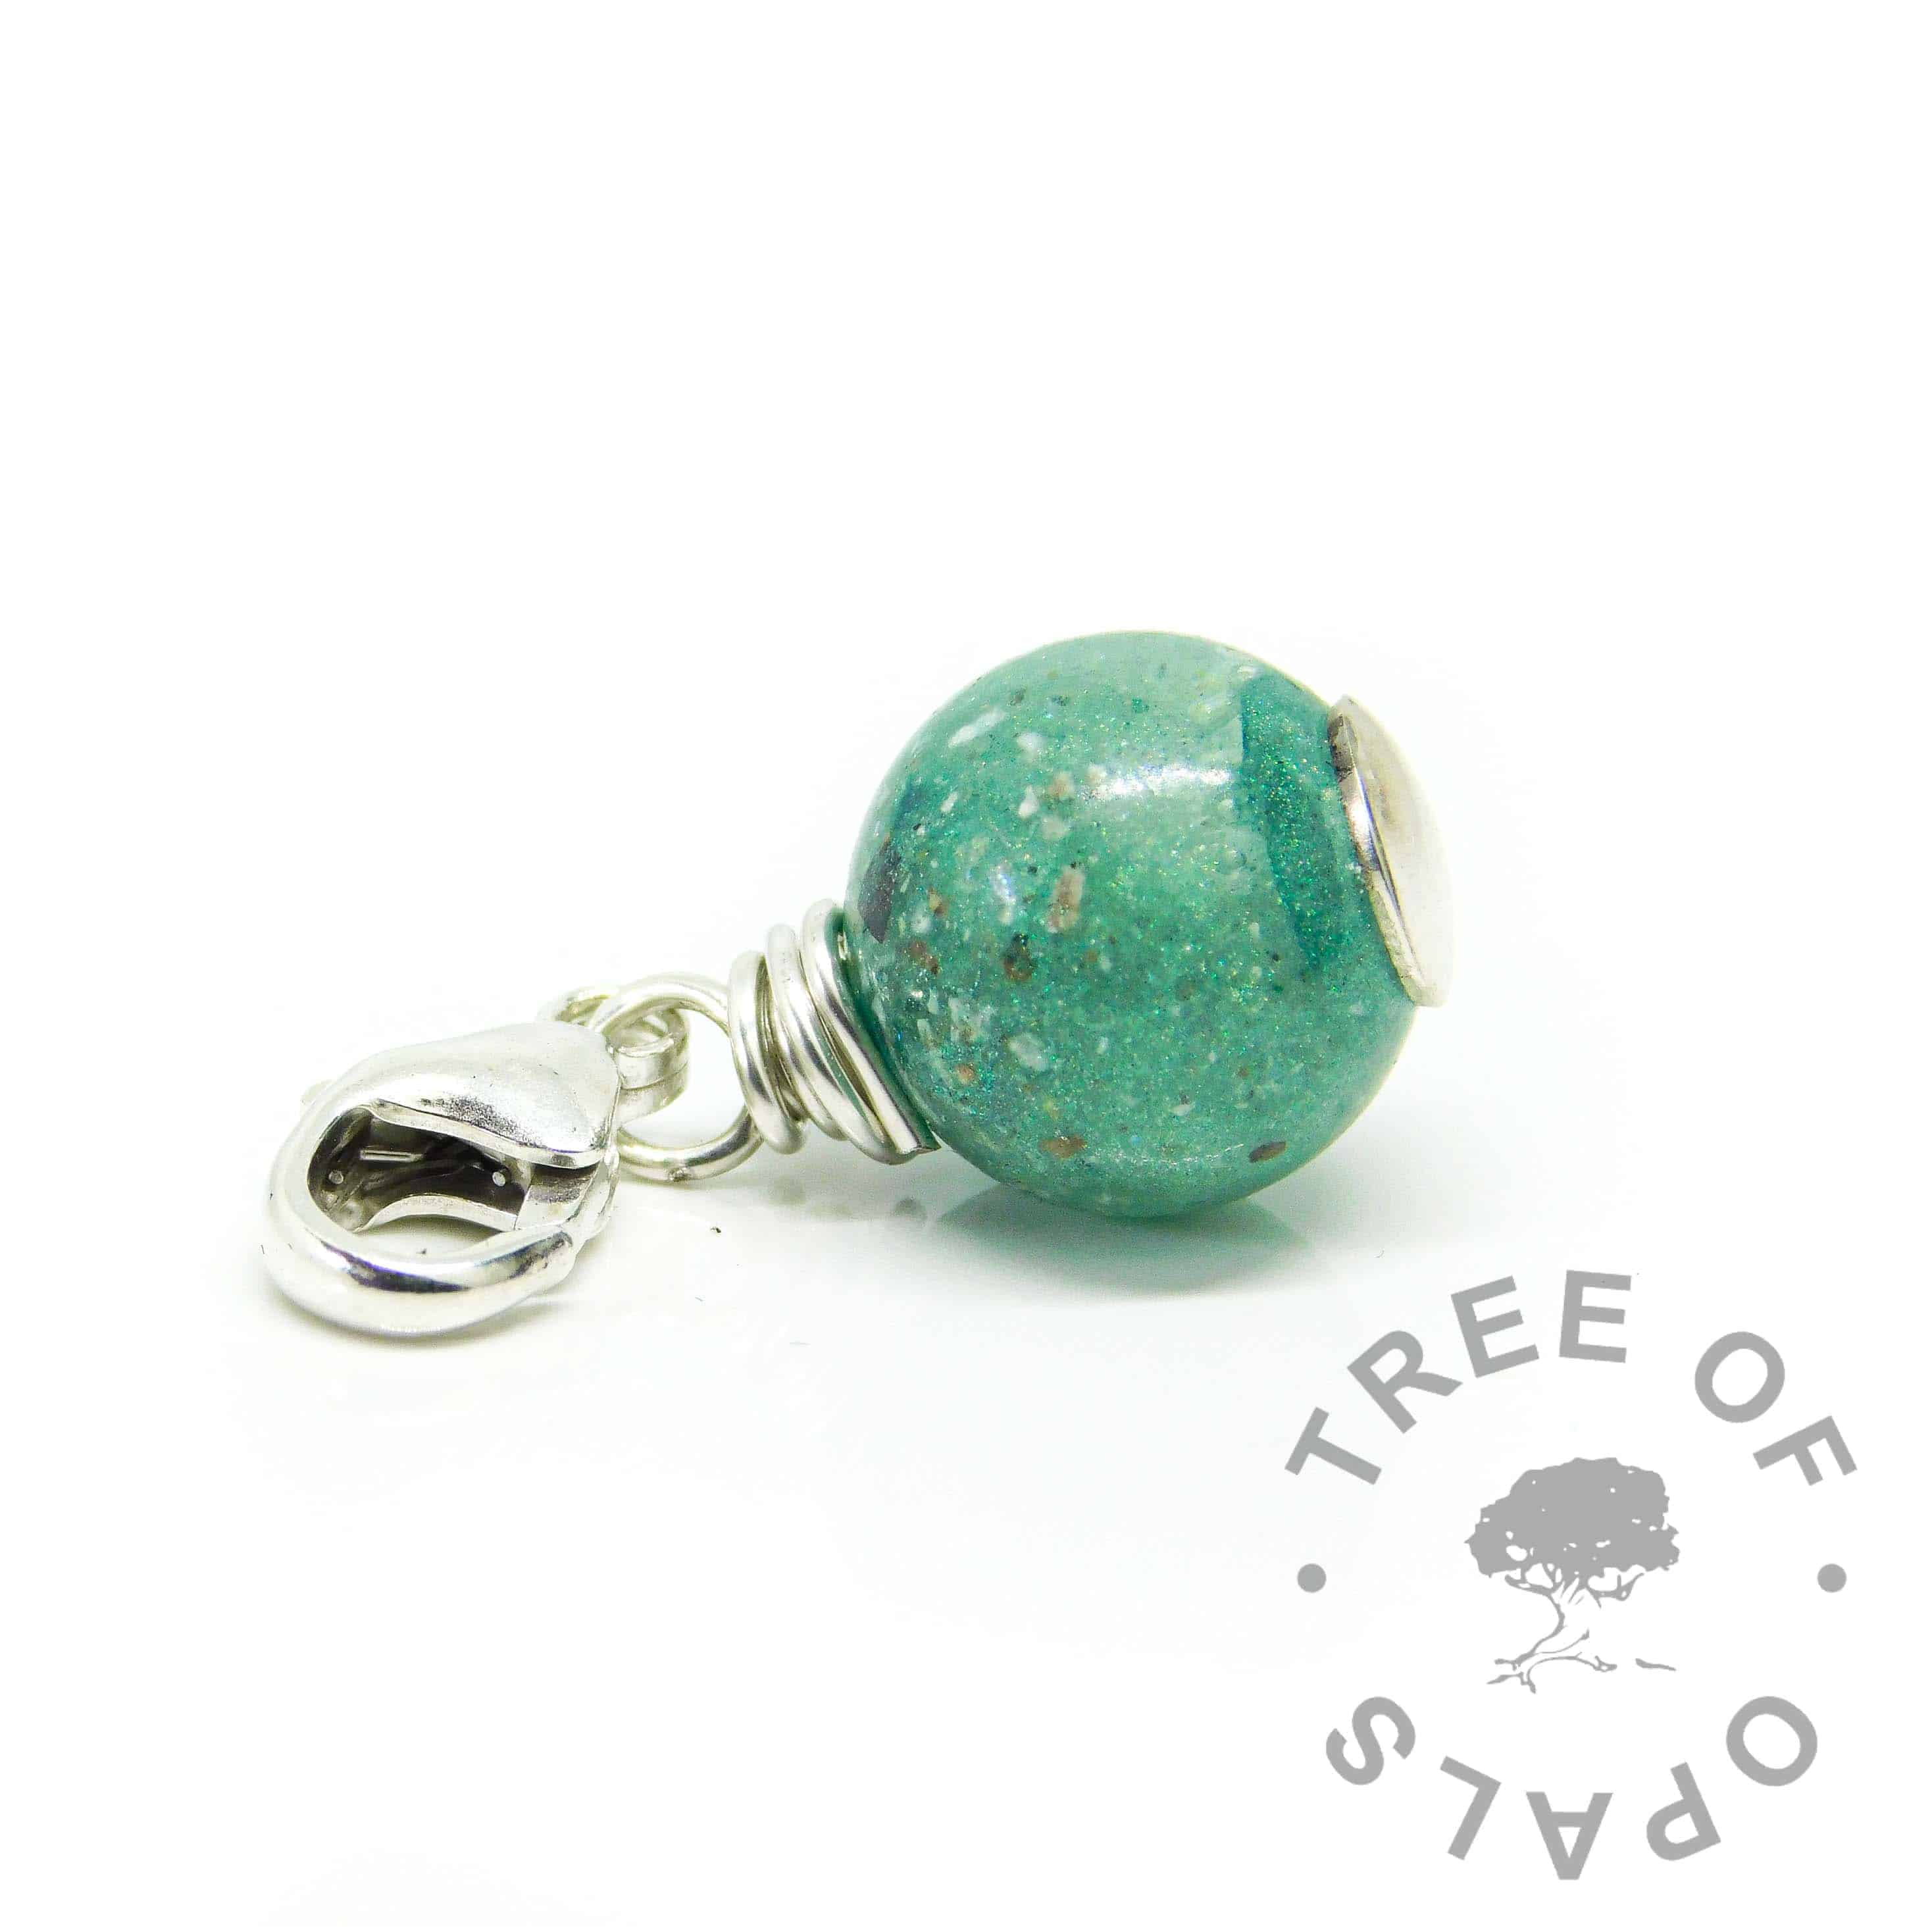 ashes orb teal. Mermaid teal resin sparkle mix with cremation ashes, solid silver wire wrapped setting with lobster clasp dangle charm setting